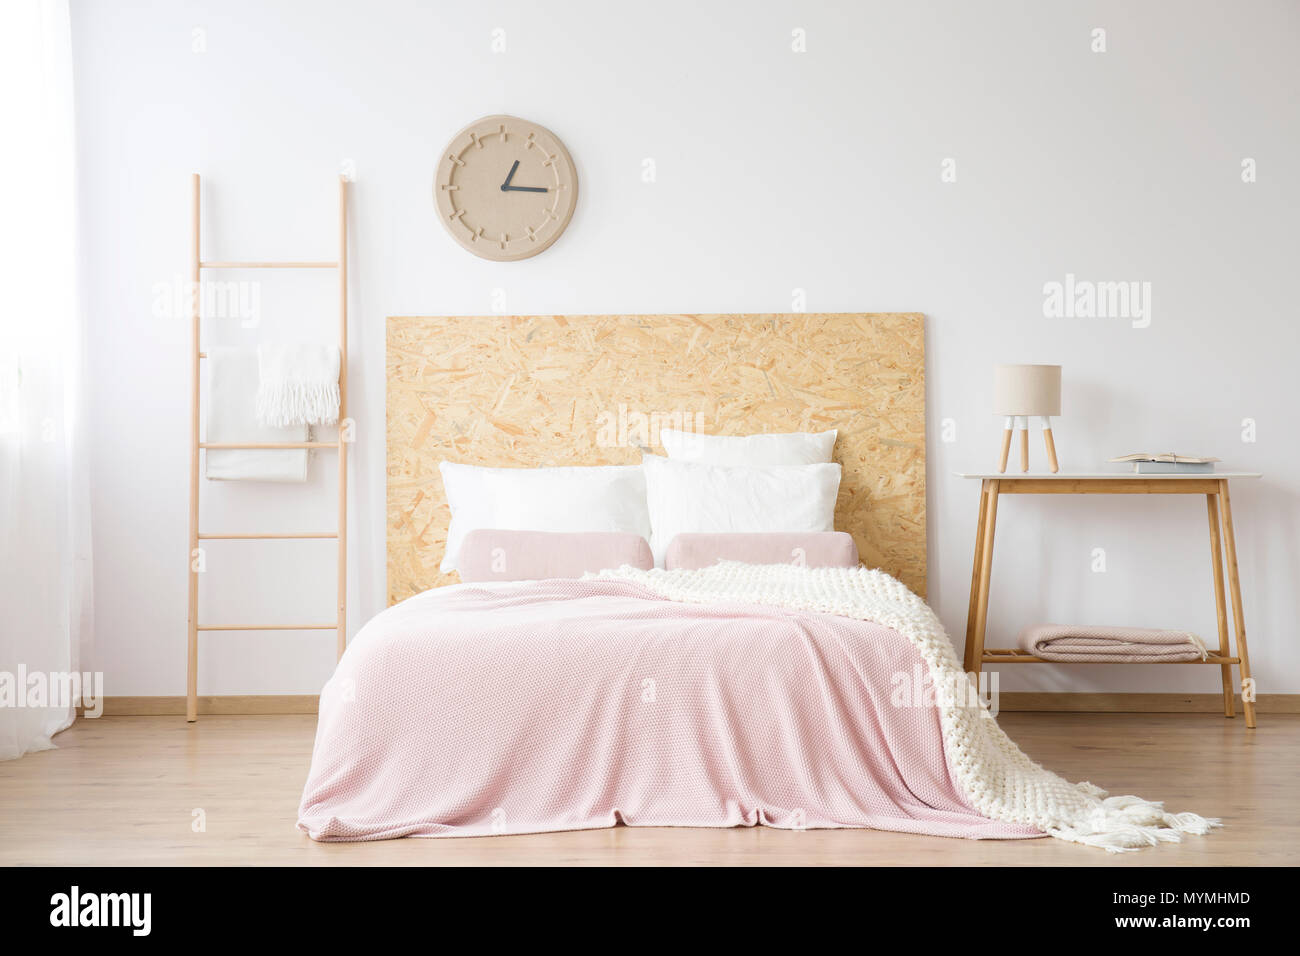 Large ladder standing next to a double bed in a modern interior of a bedroom Stock Photo